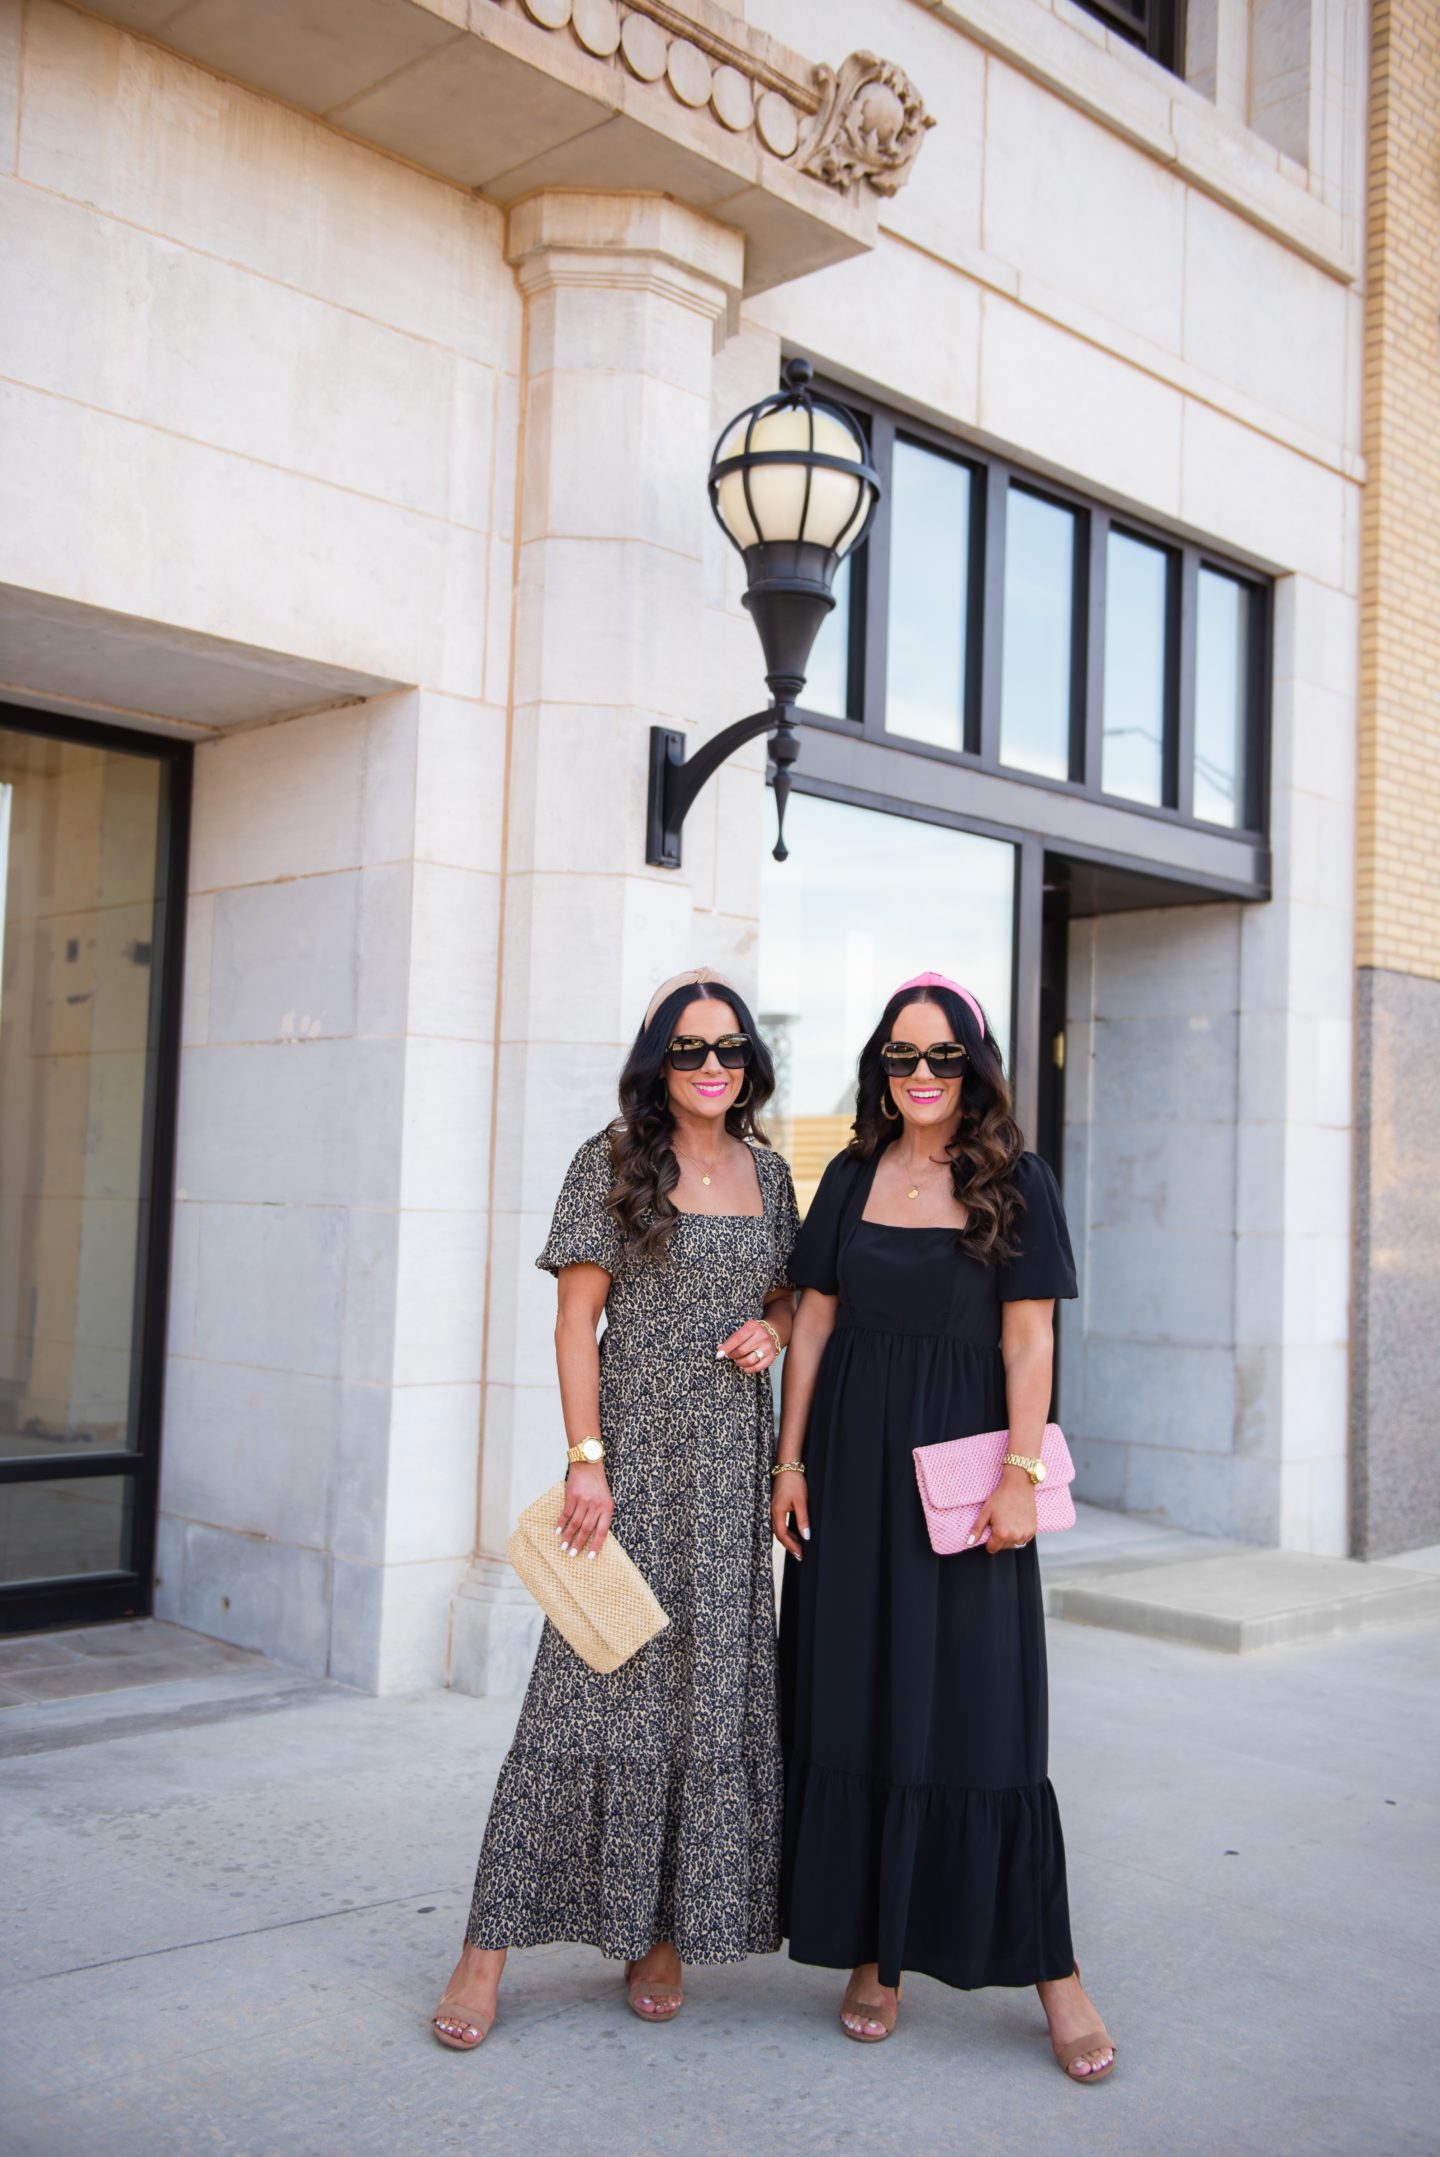 New Nordstrom Rack Spring Dress Finds! - The Double Take Girls